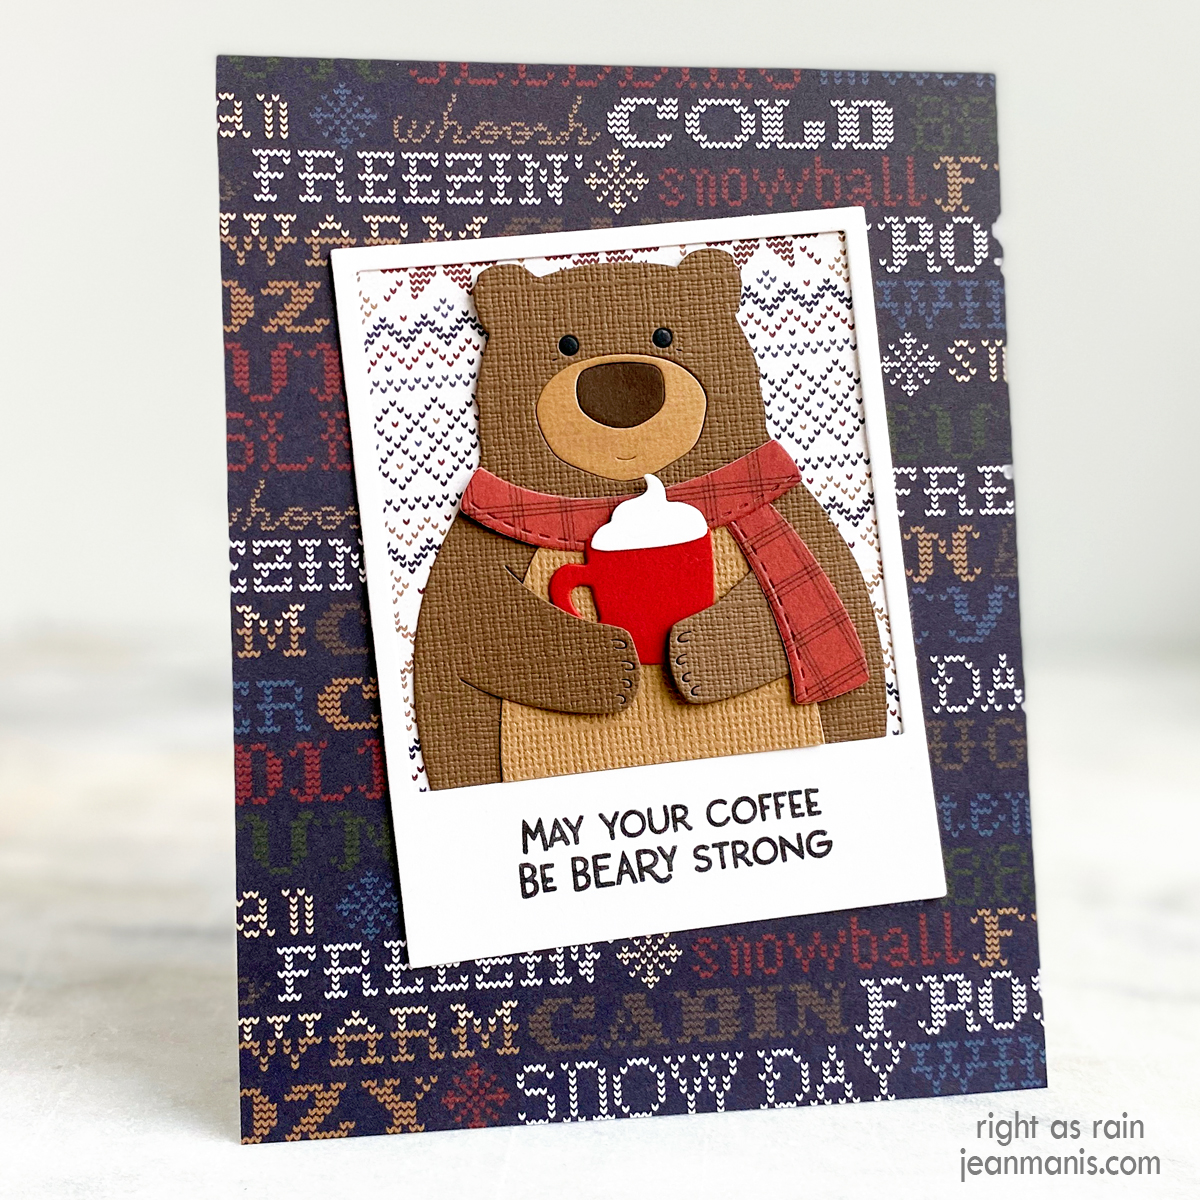 Warm Wishes and Bear Hugs